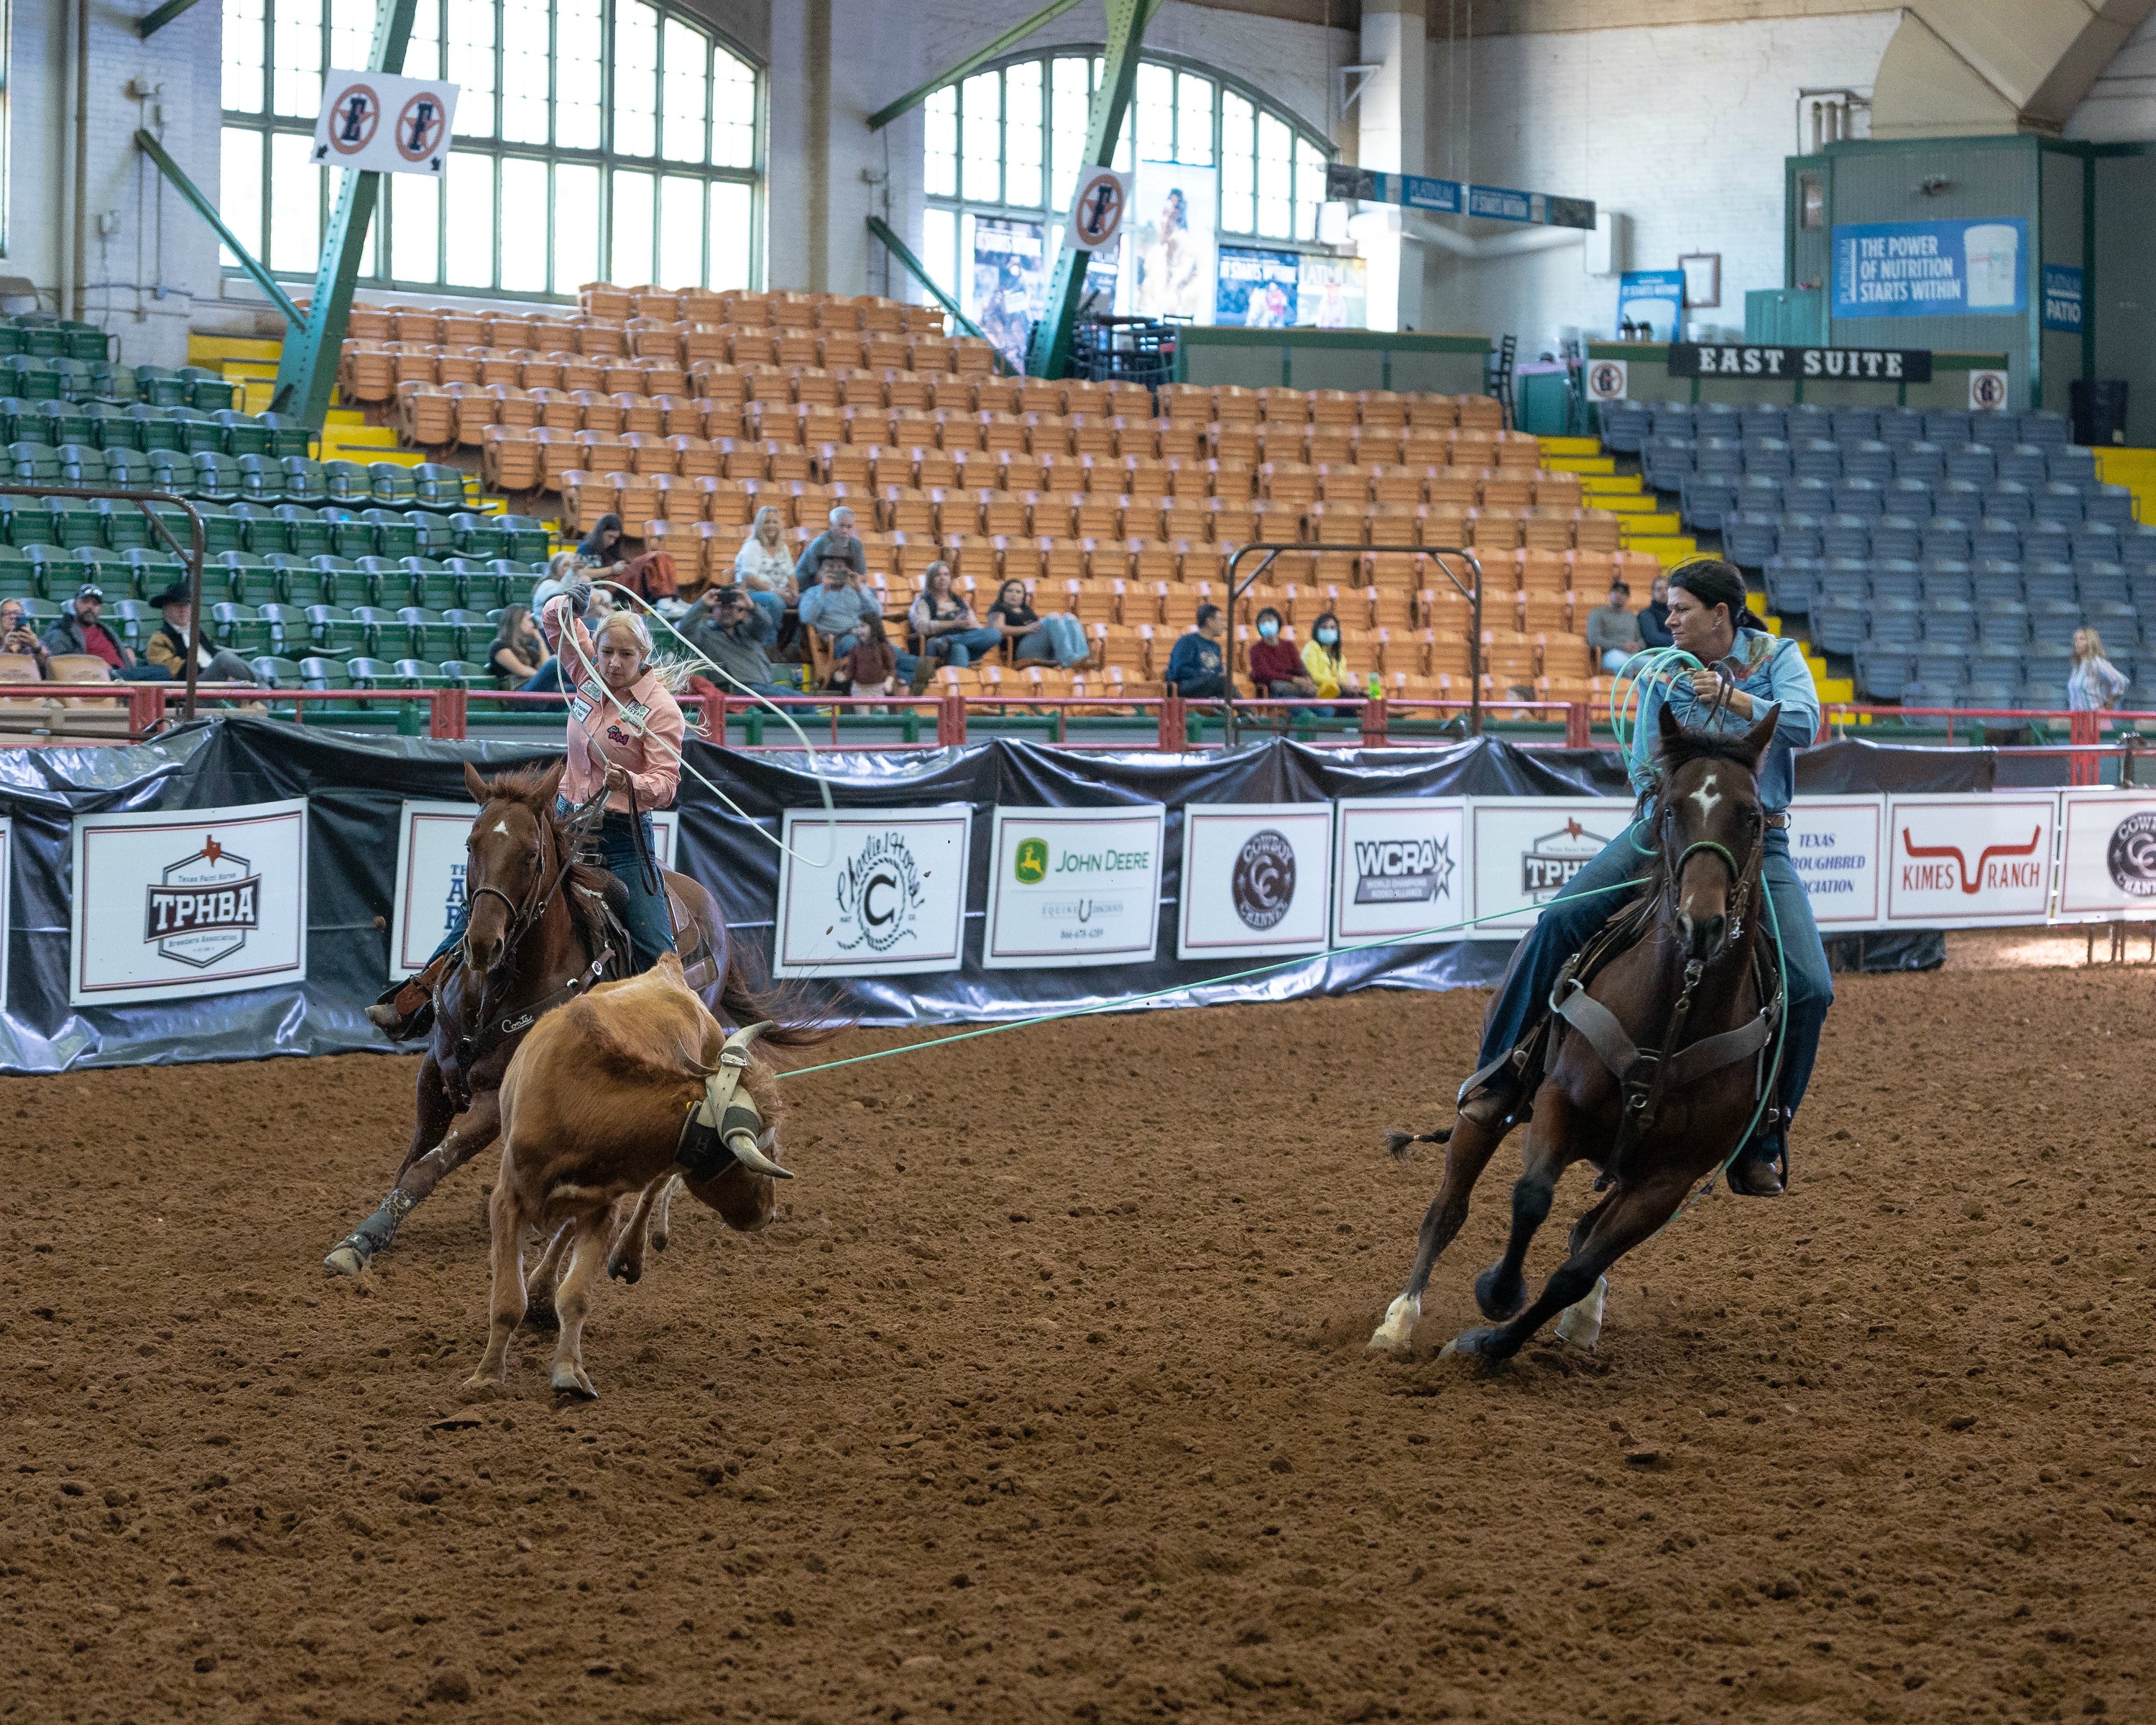 Team roping, cowgirl, western horse sports, ranch horse, cowboy, western lifestyle